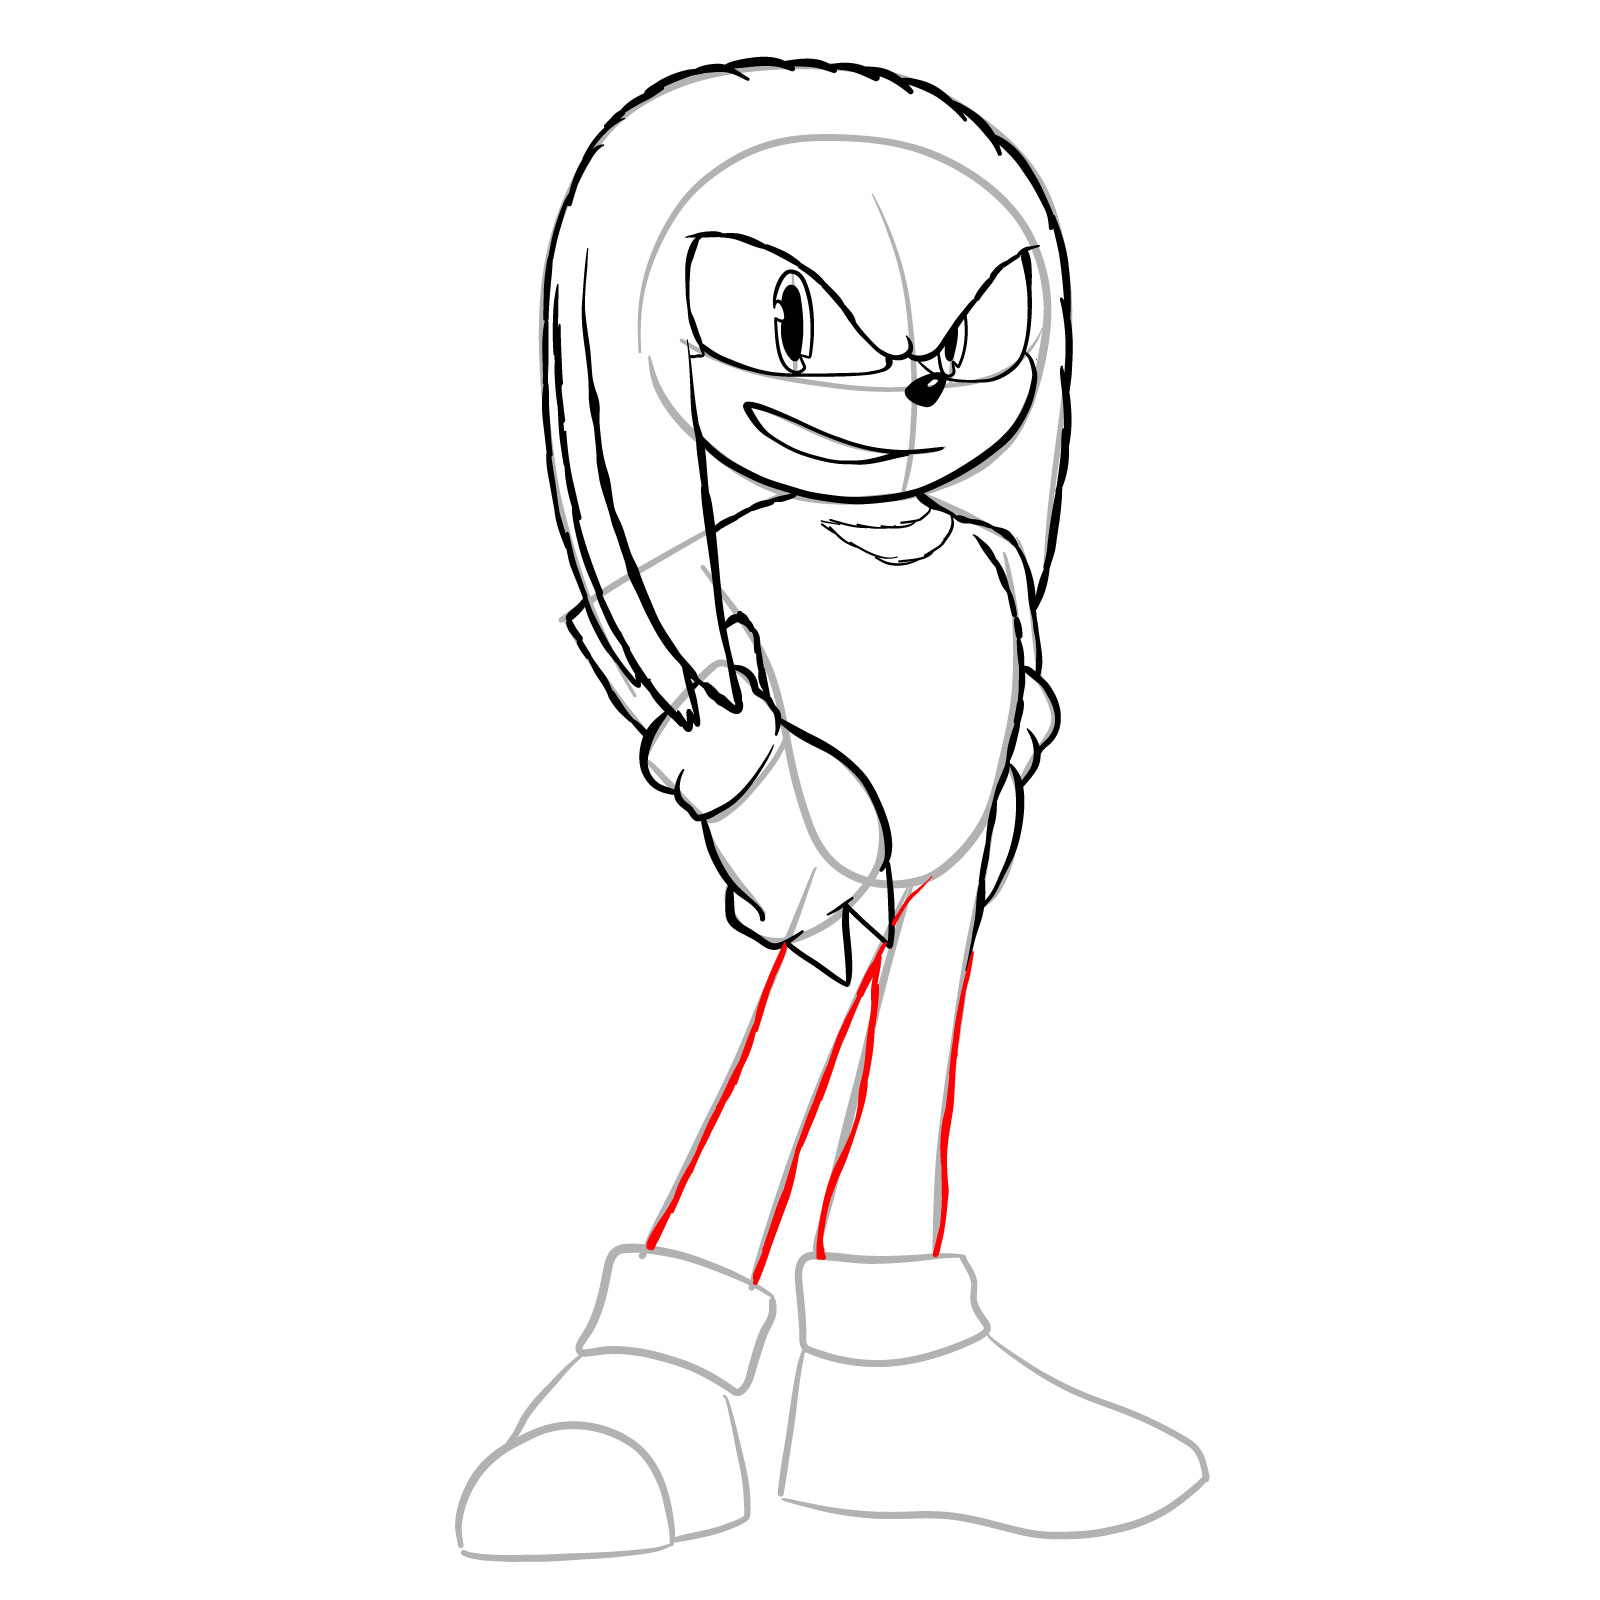 How to draw Knuckles from the movie - step 18